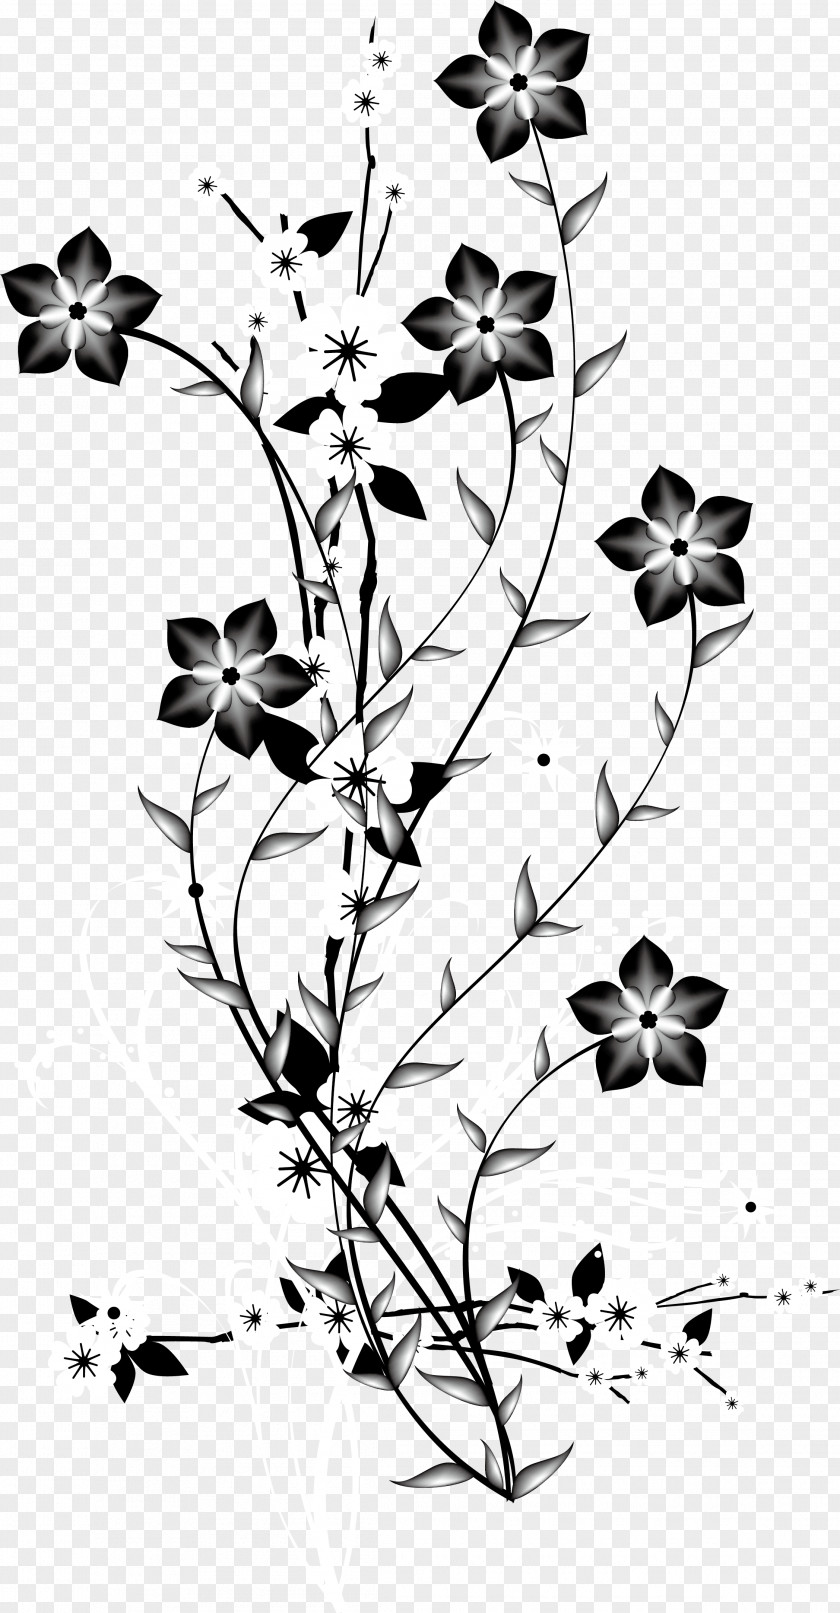 Black And White Decorative Background Vector Flowers Branch China Japan Flower Euclidean PNG